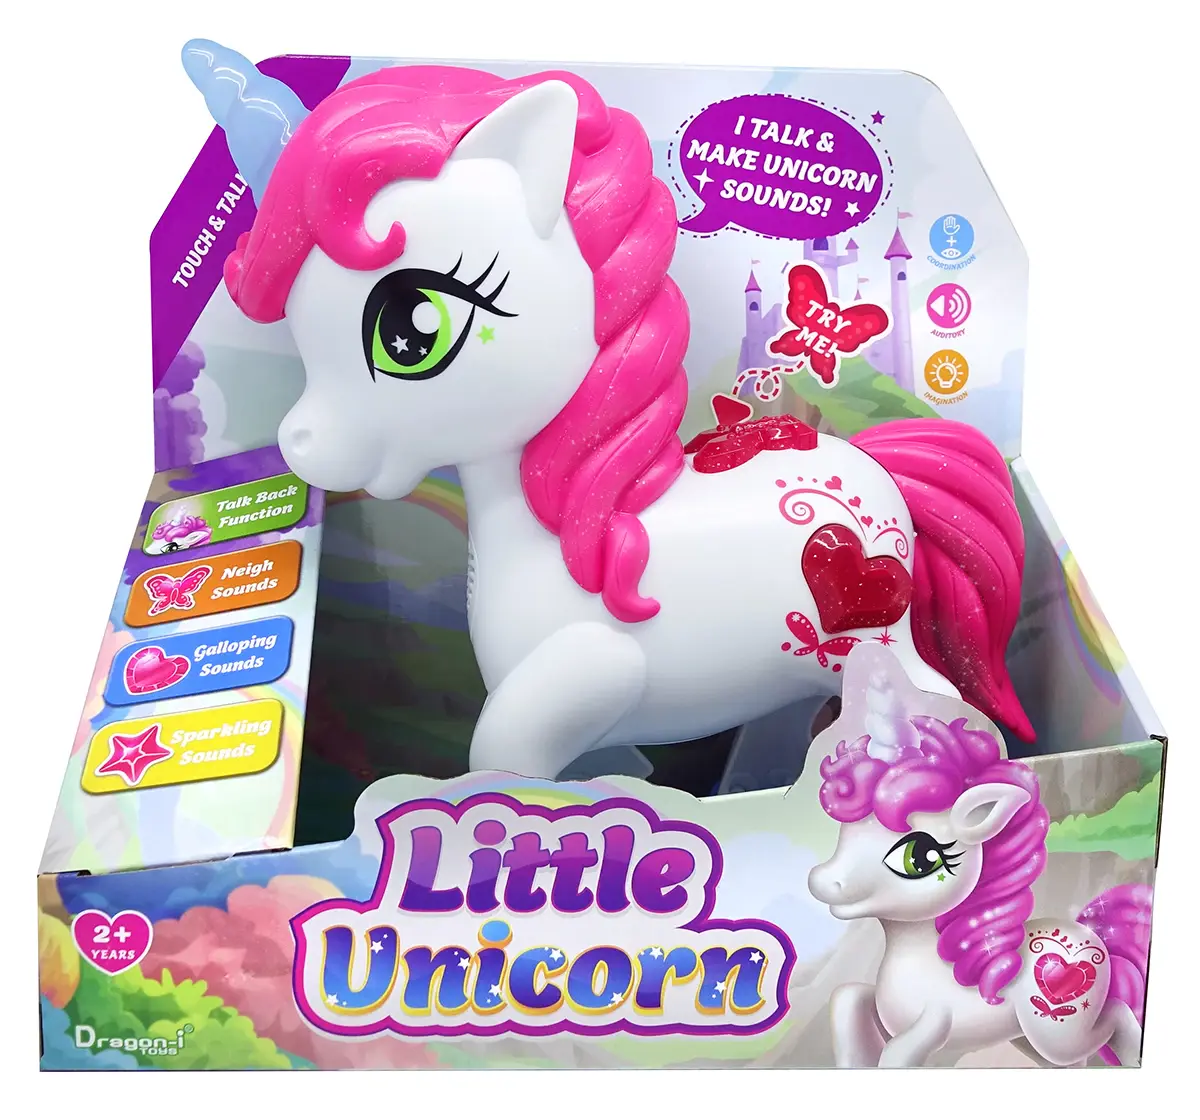 Dragon I Little Unicorn Touch and Talk Electronic Dinosaur Toys for Kids 2Y+, Multicolour